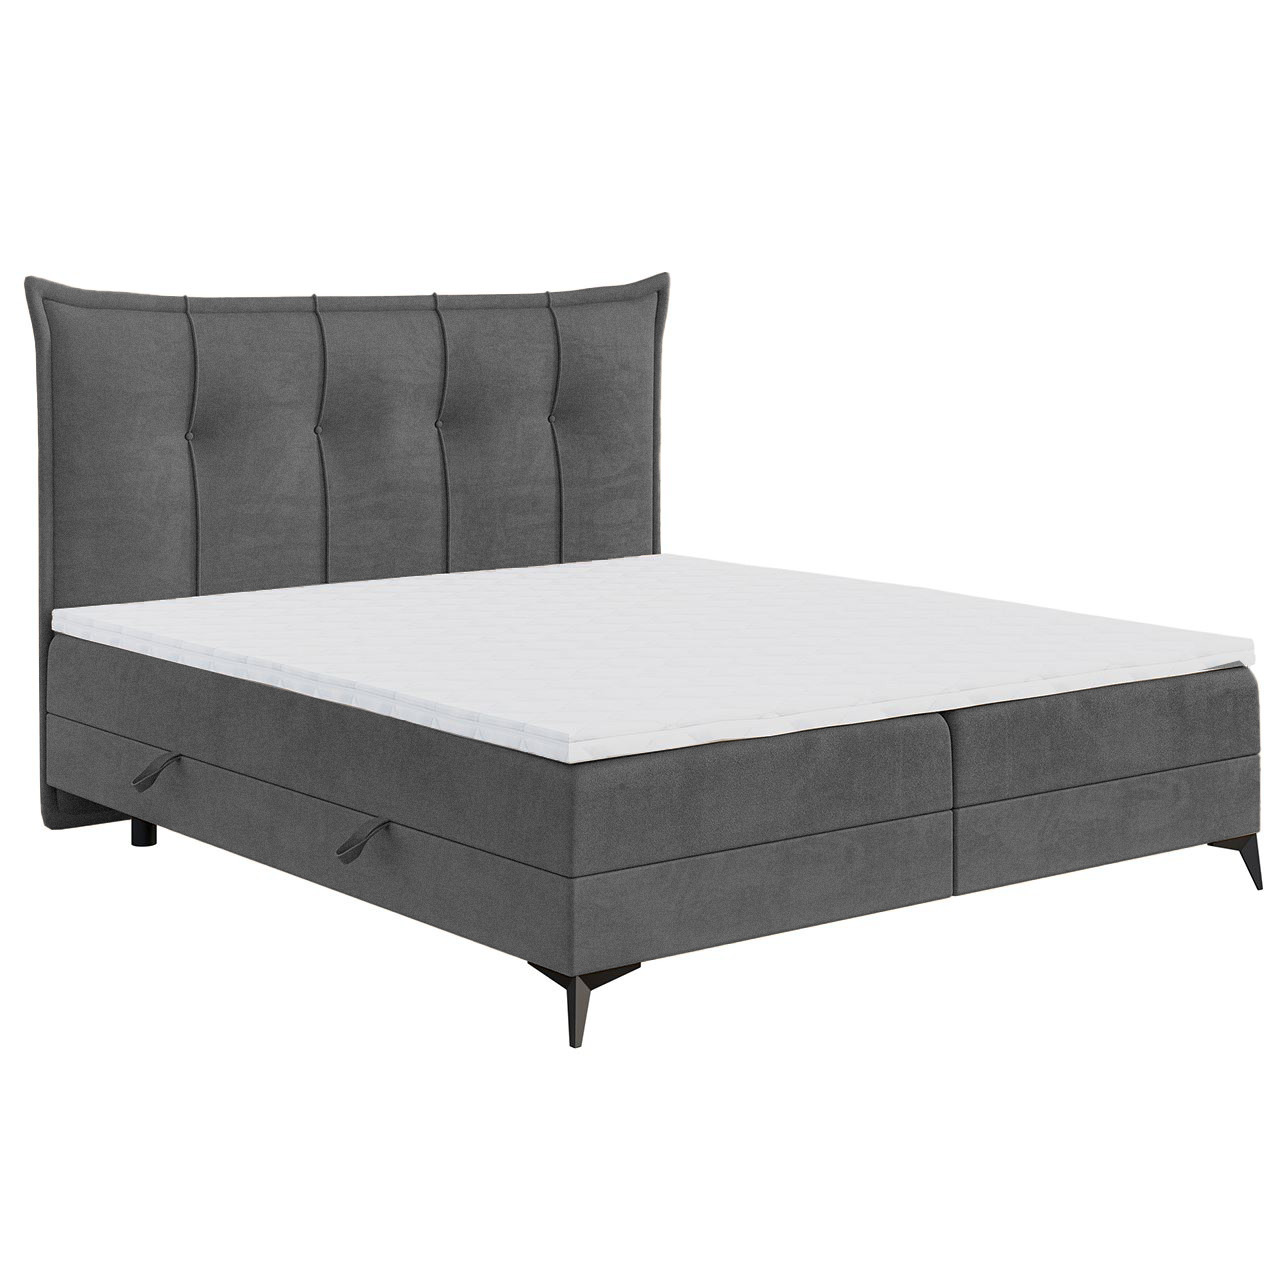 Upholstered bed FOX 180x200 monolith 92